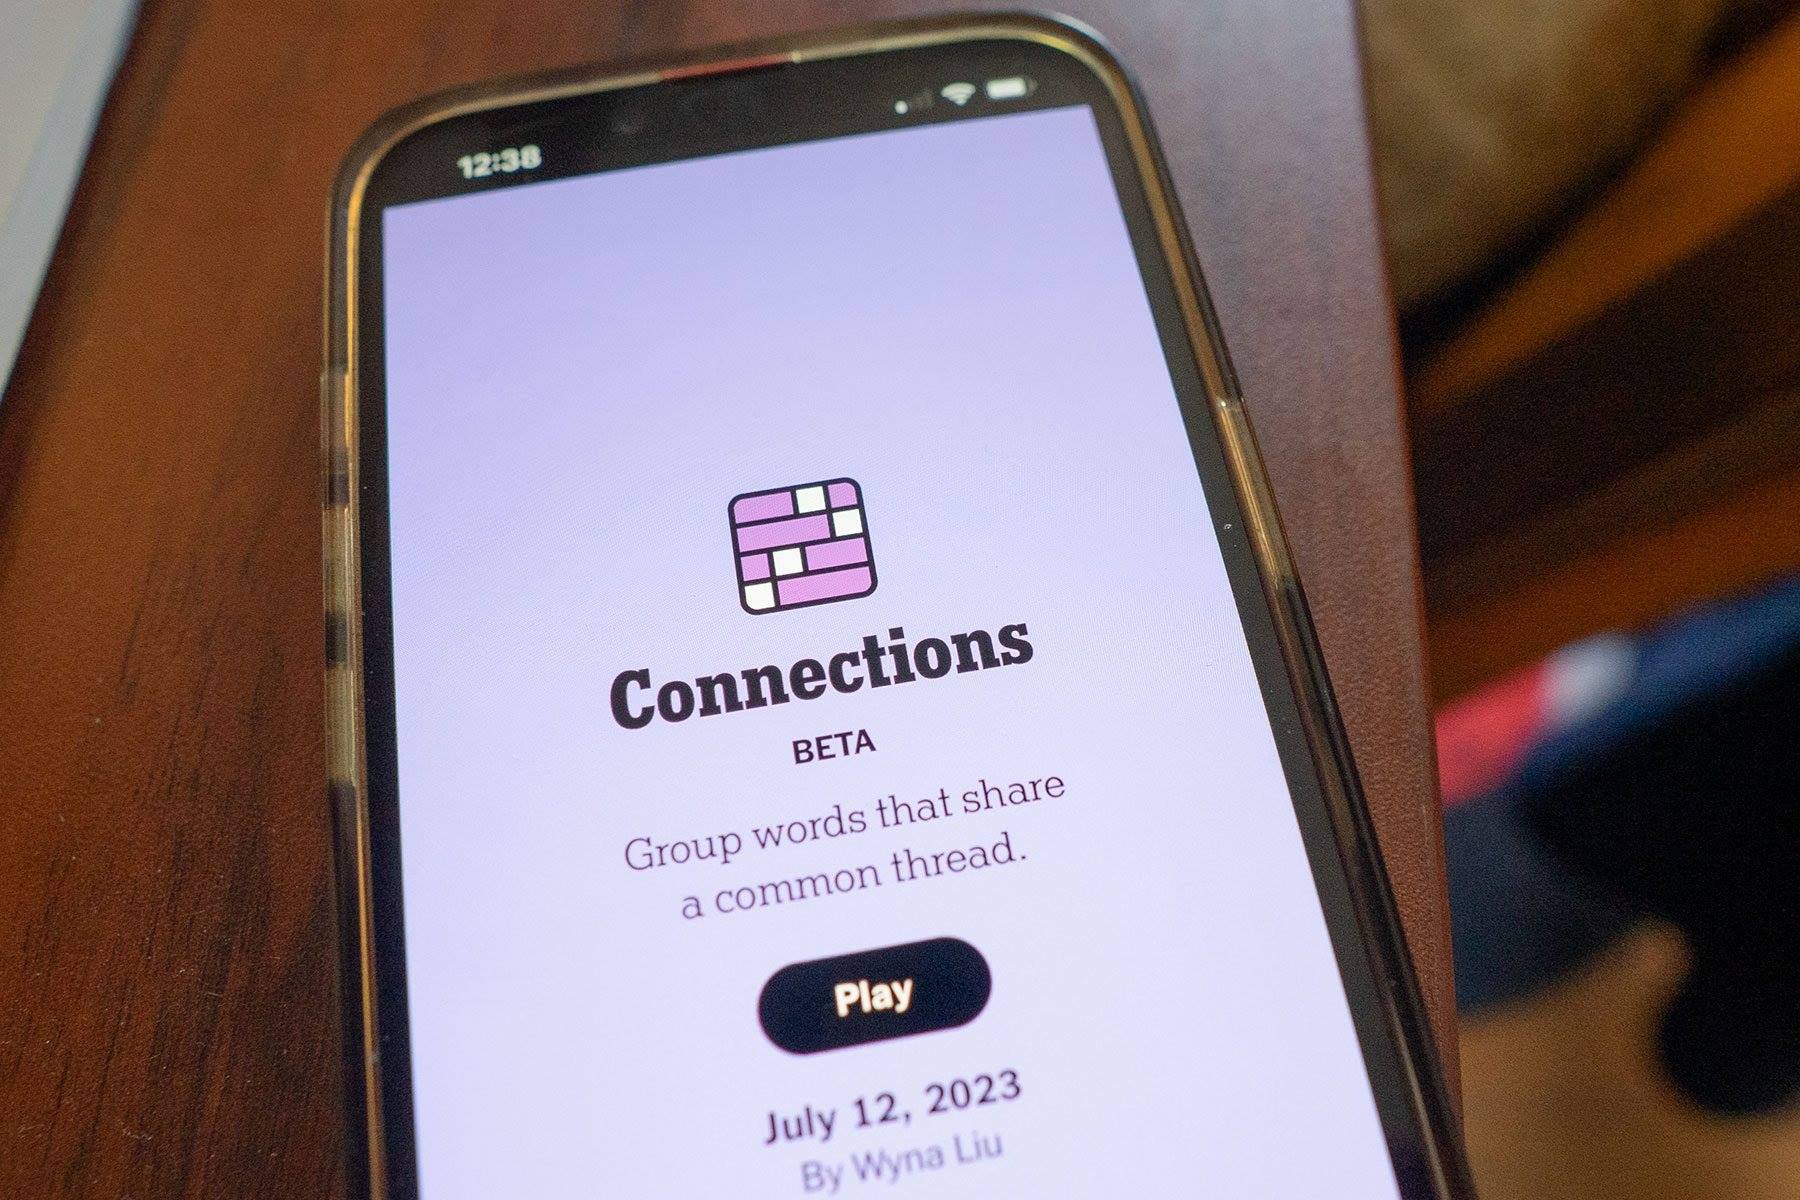 New York Times Launches Connections, The Second Most Popular Game After Wordle